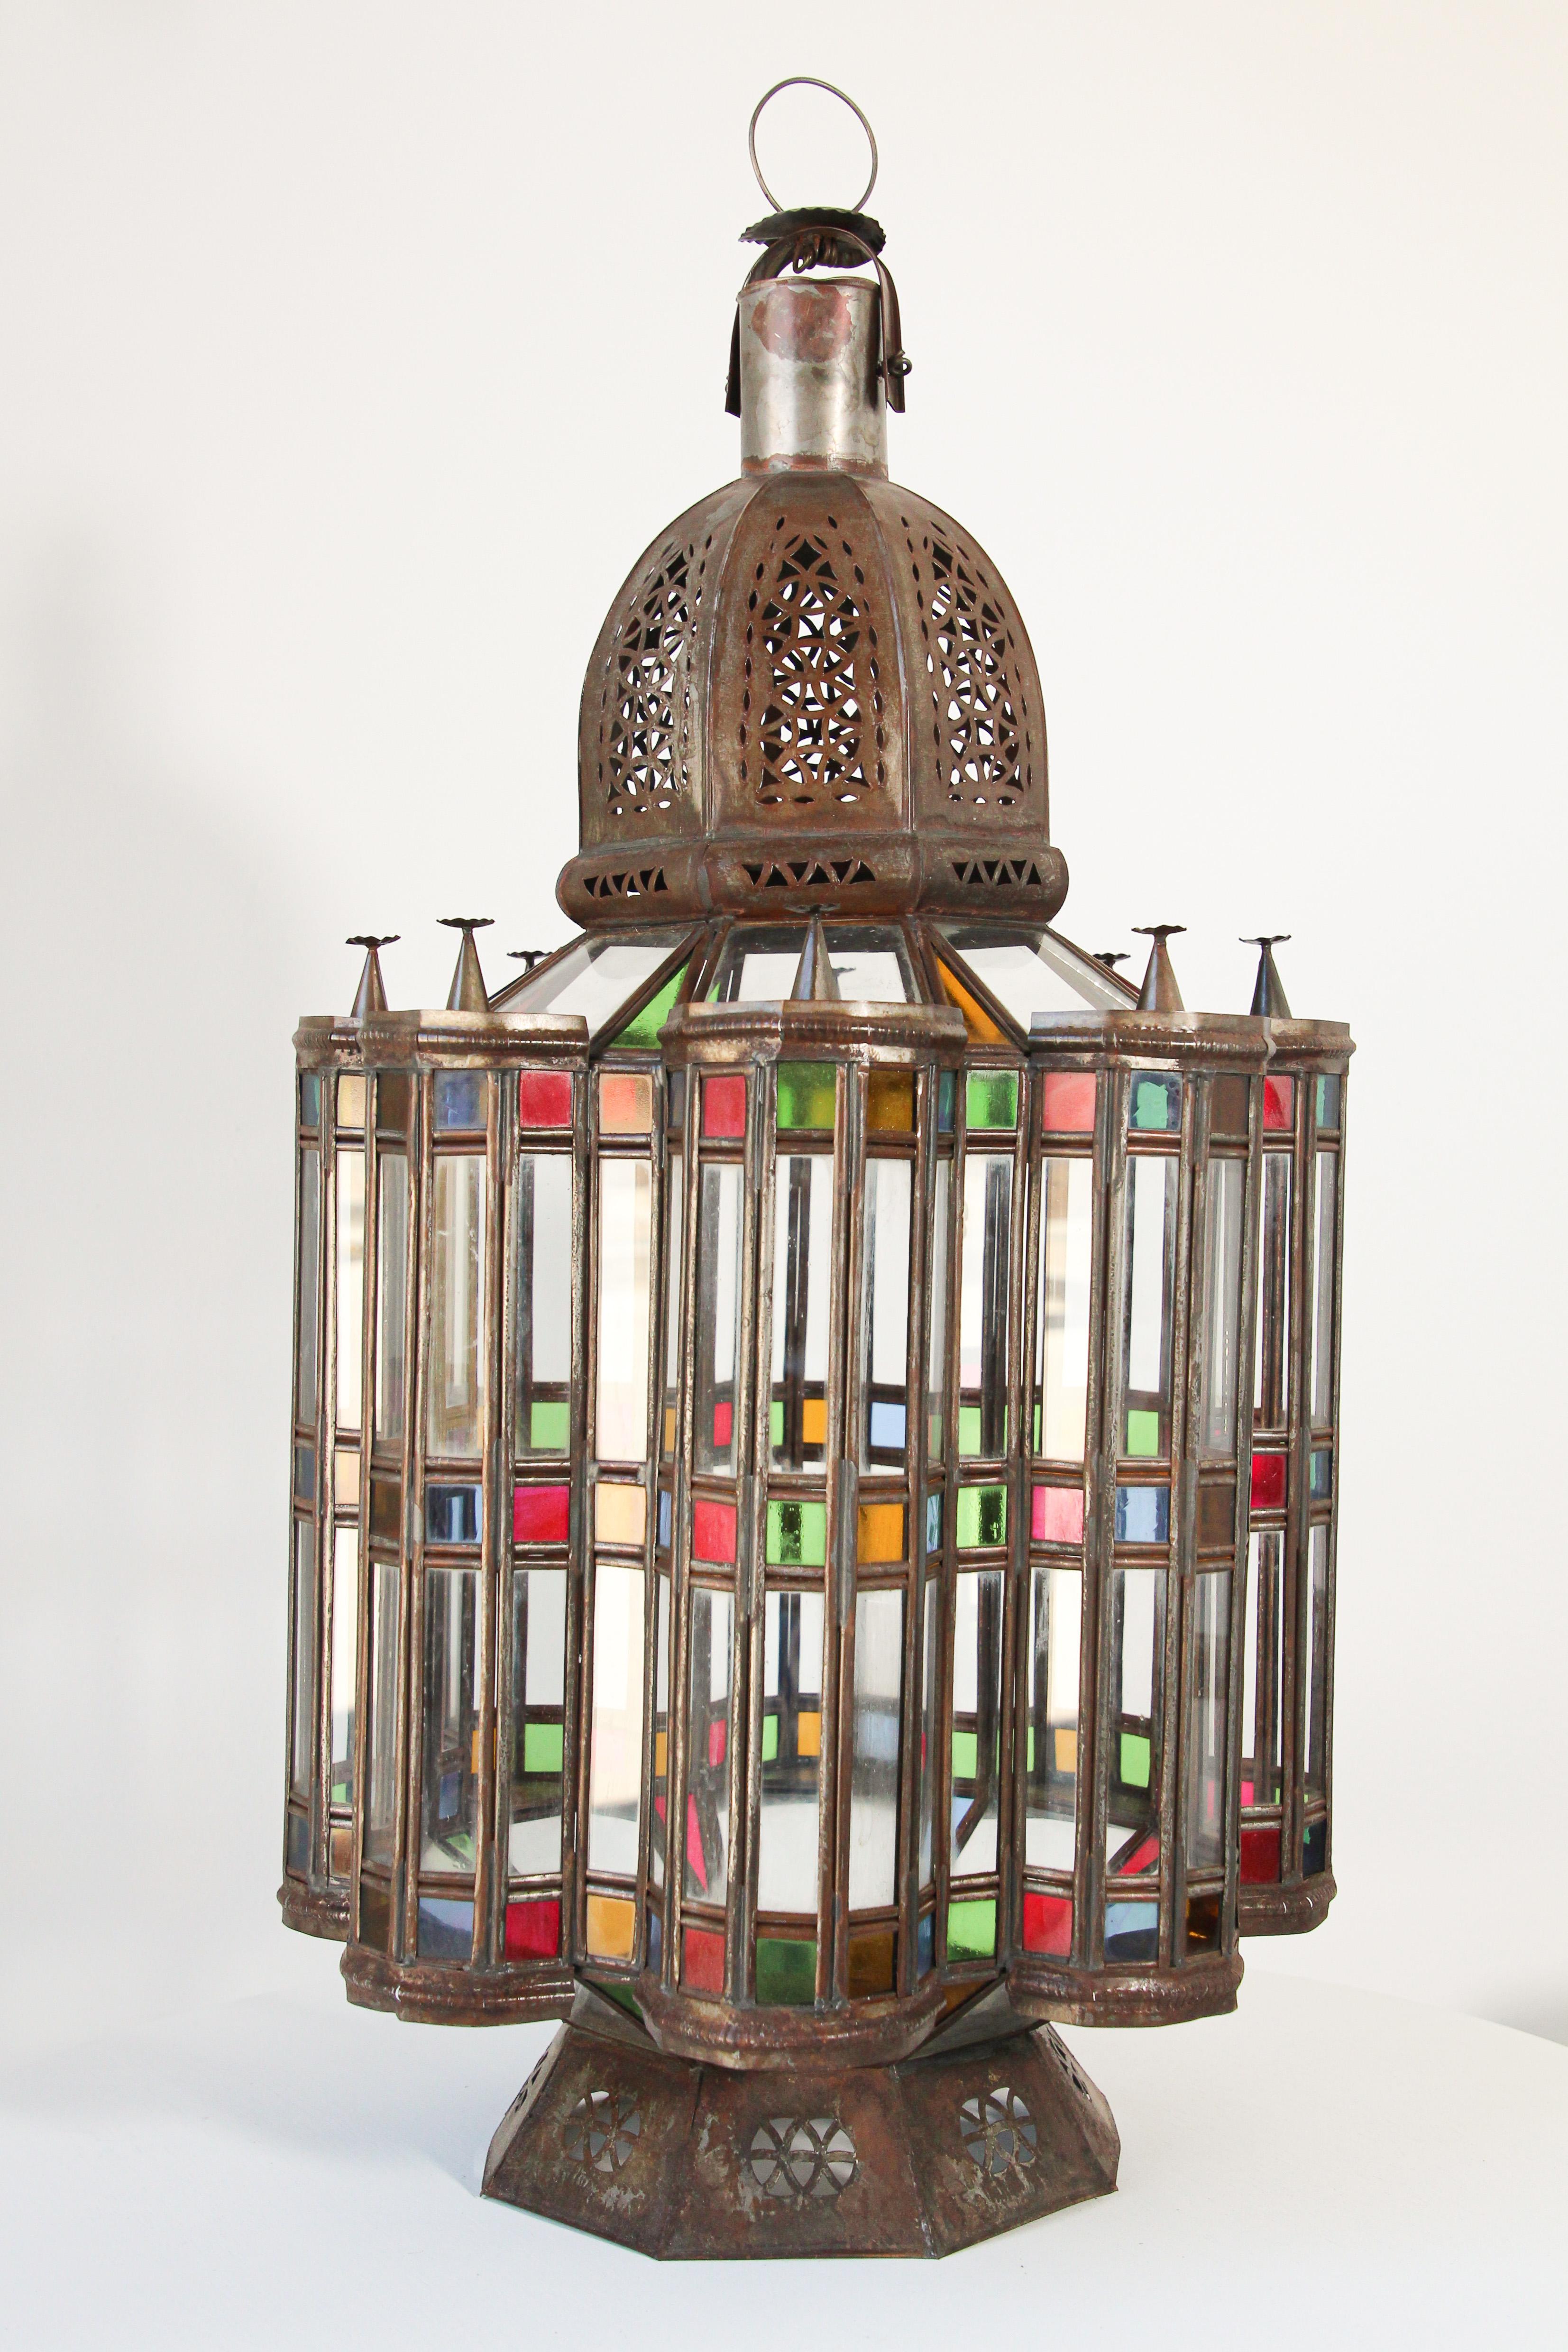 Large Moroccan Mamounia glass lantern with Moorish design.
Elegant Impressive intricate pierced metal and glass Moroccan lantern.
Large 29 inches tall with clear, blue, green, red and gold blown glass all around.
Very fine craftsmanship, antiqued